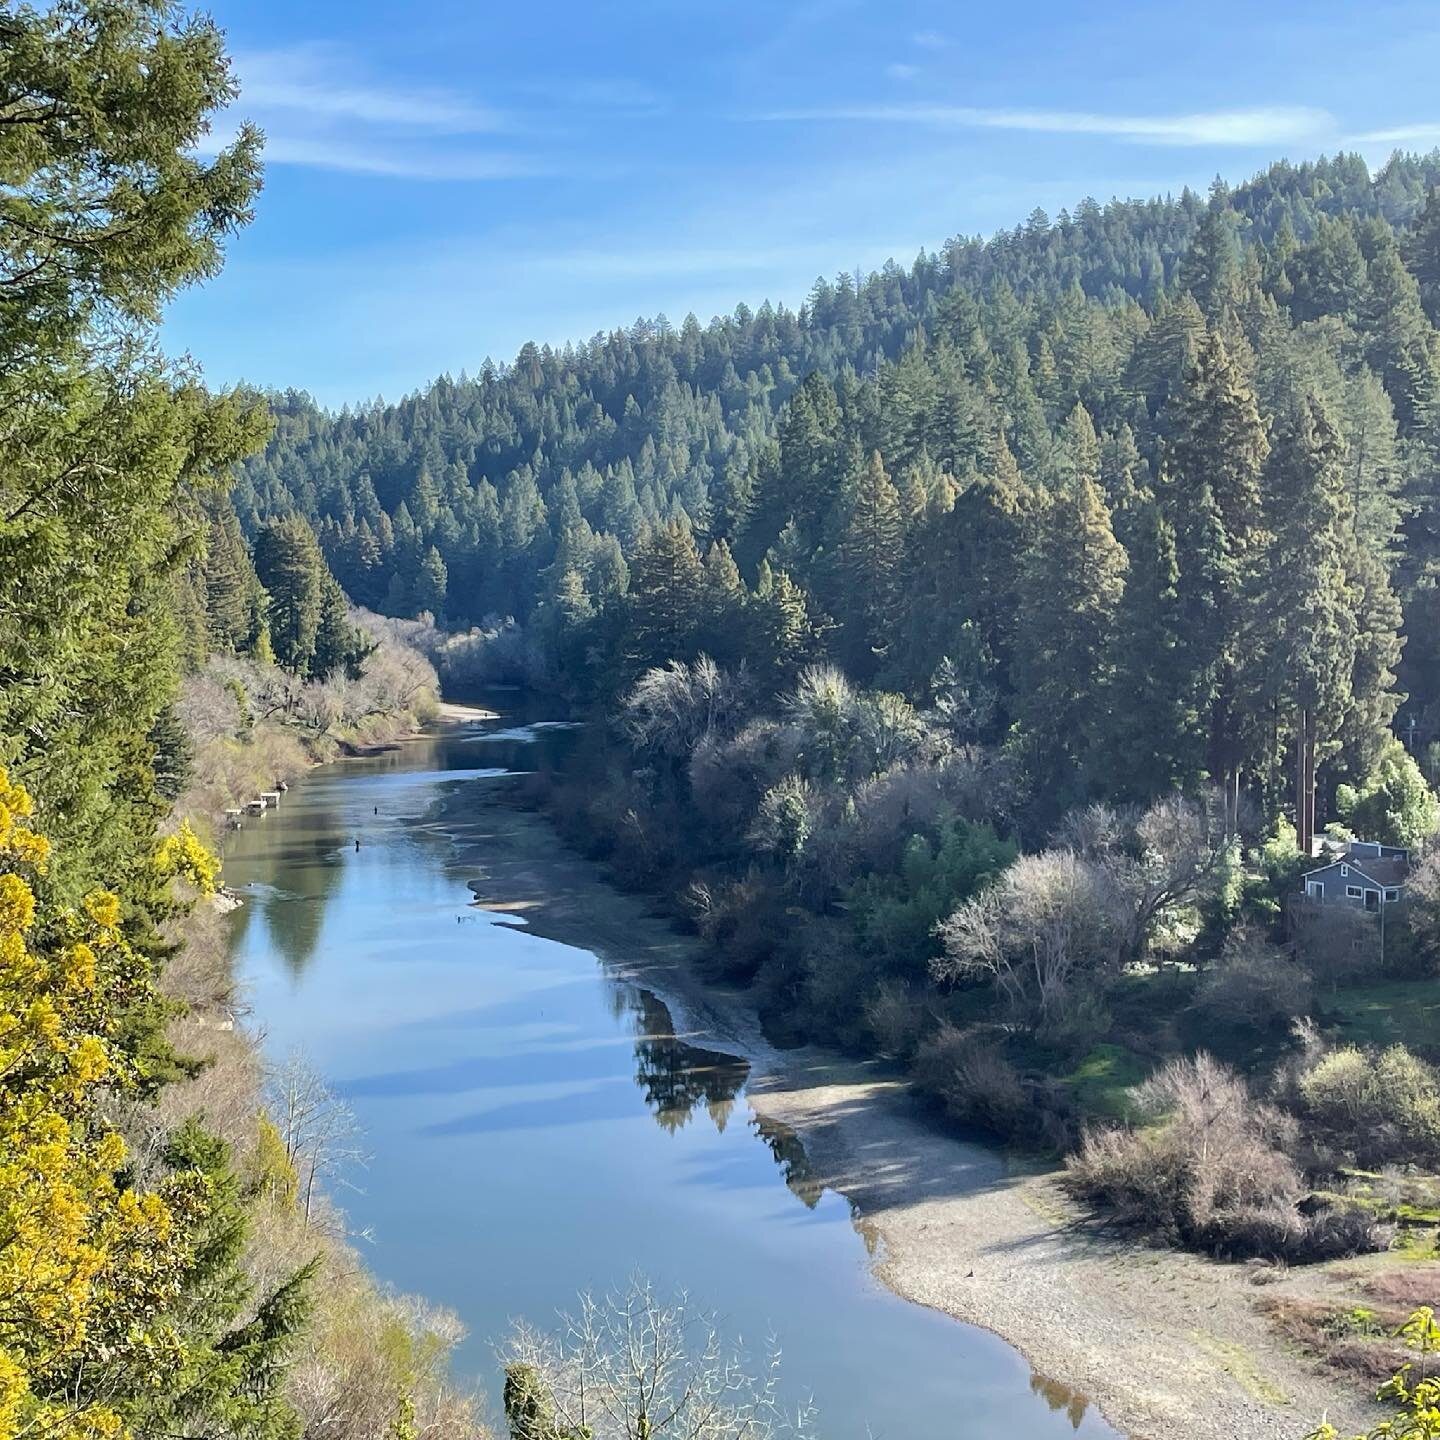 It&rsquo;s a year to the day that the GFC was created and we held our first meeting over Zoom. Thanks to everyone who has encouraged and supported our efforts to protect the Redwoods and Douglas Firs along the Russian River in Guerneville. Whether yo